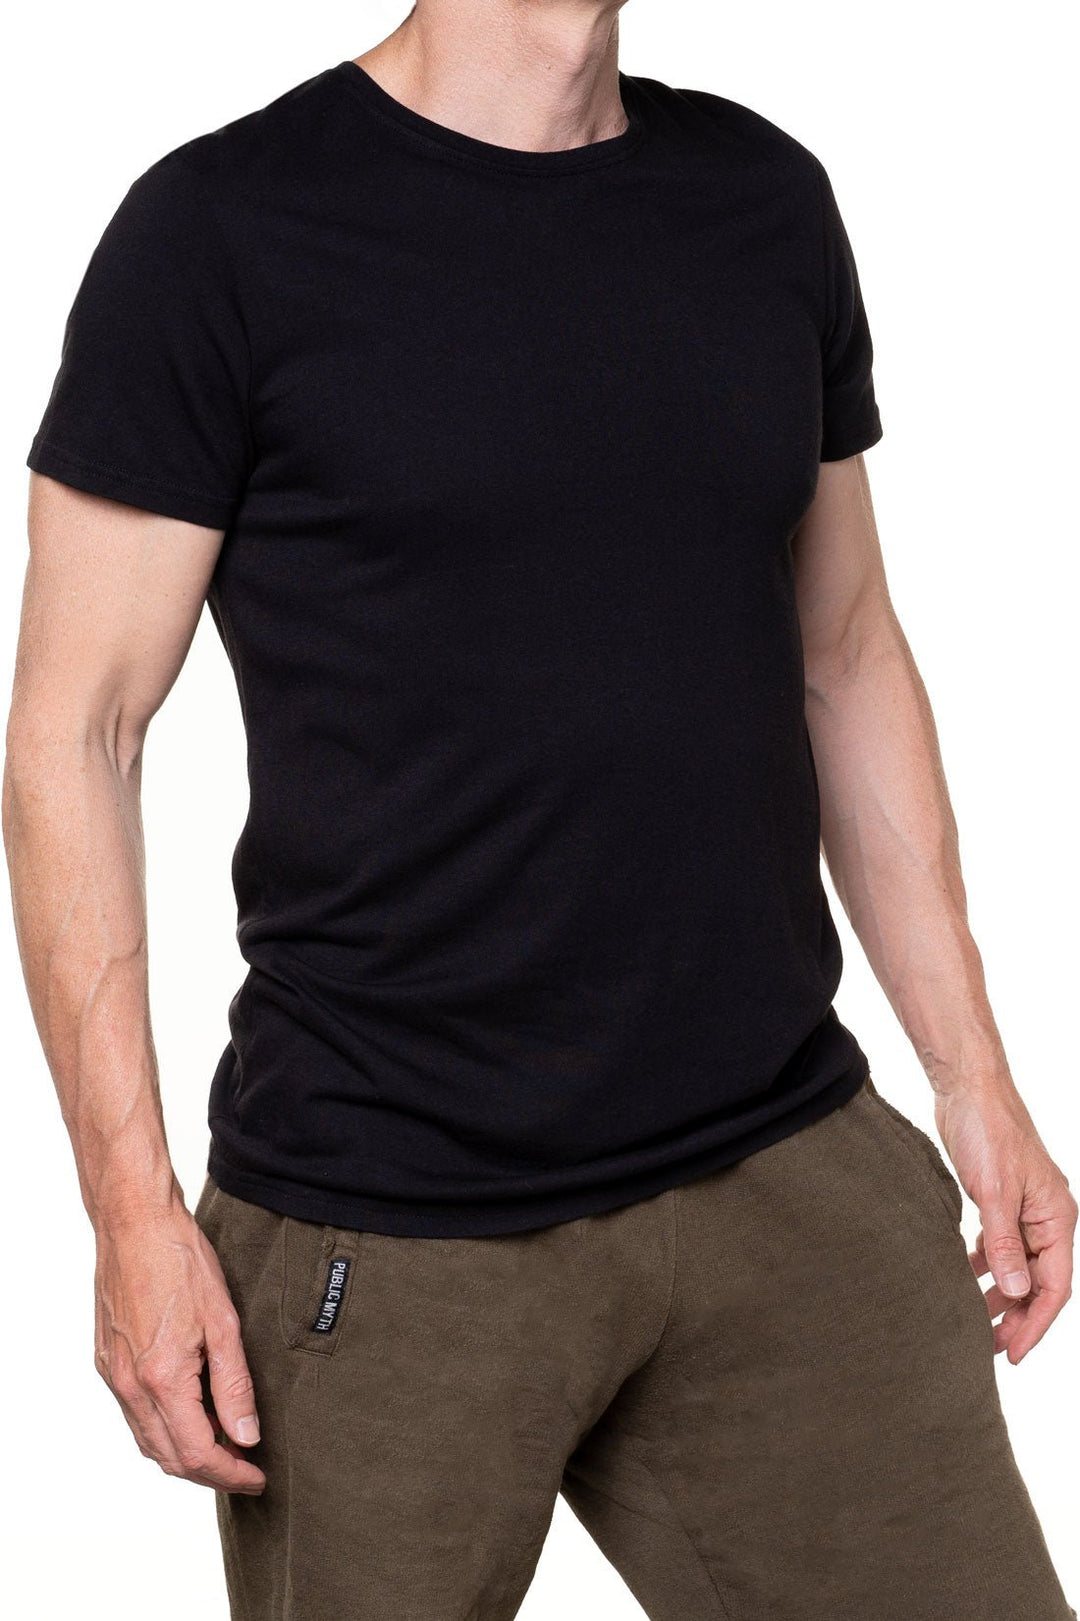 black men's bamboo T-shirt ethically made from  soft sustainable bamboo cotton blend.